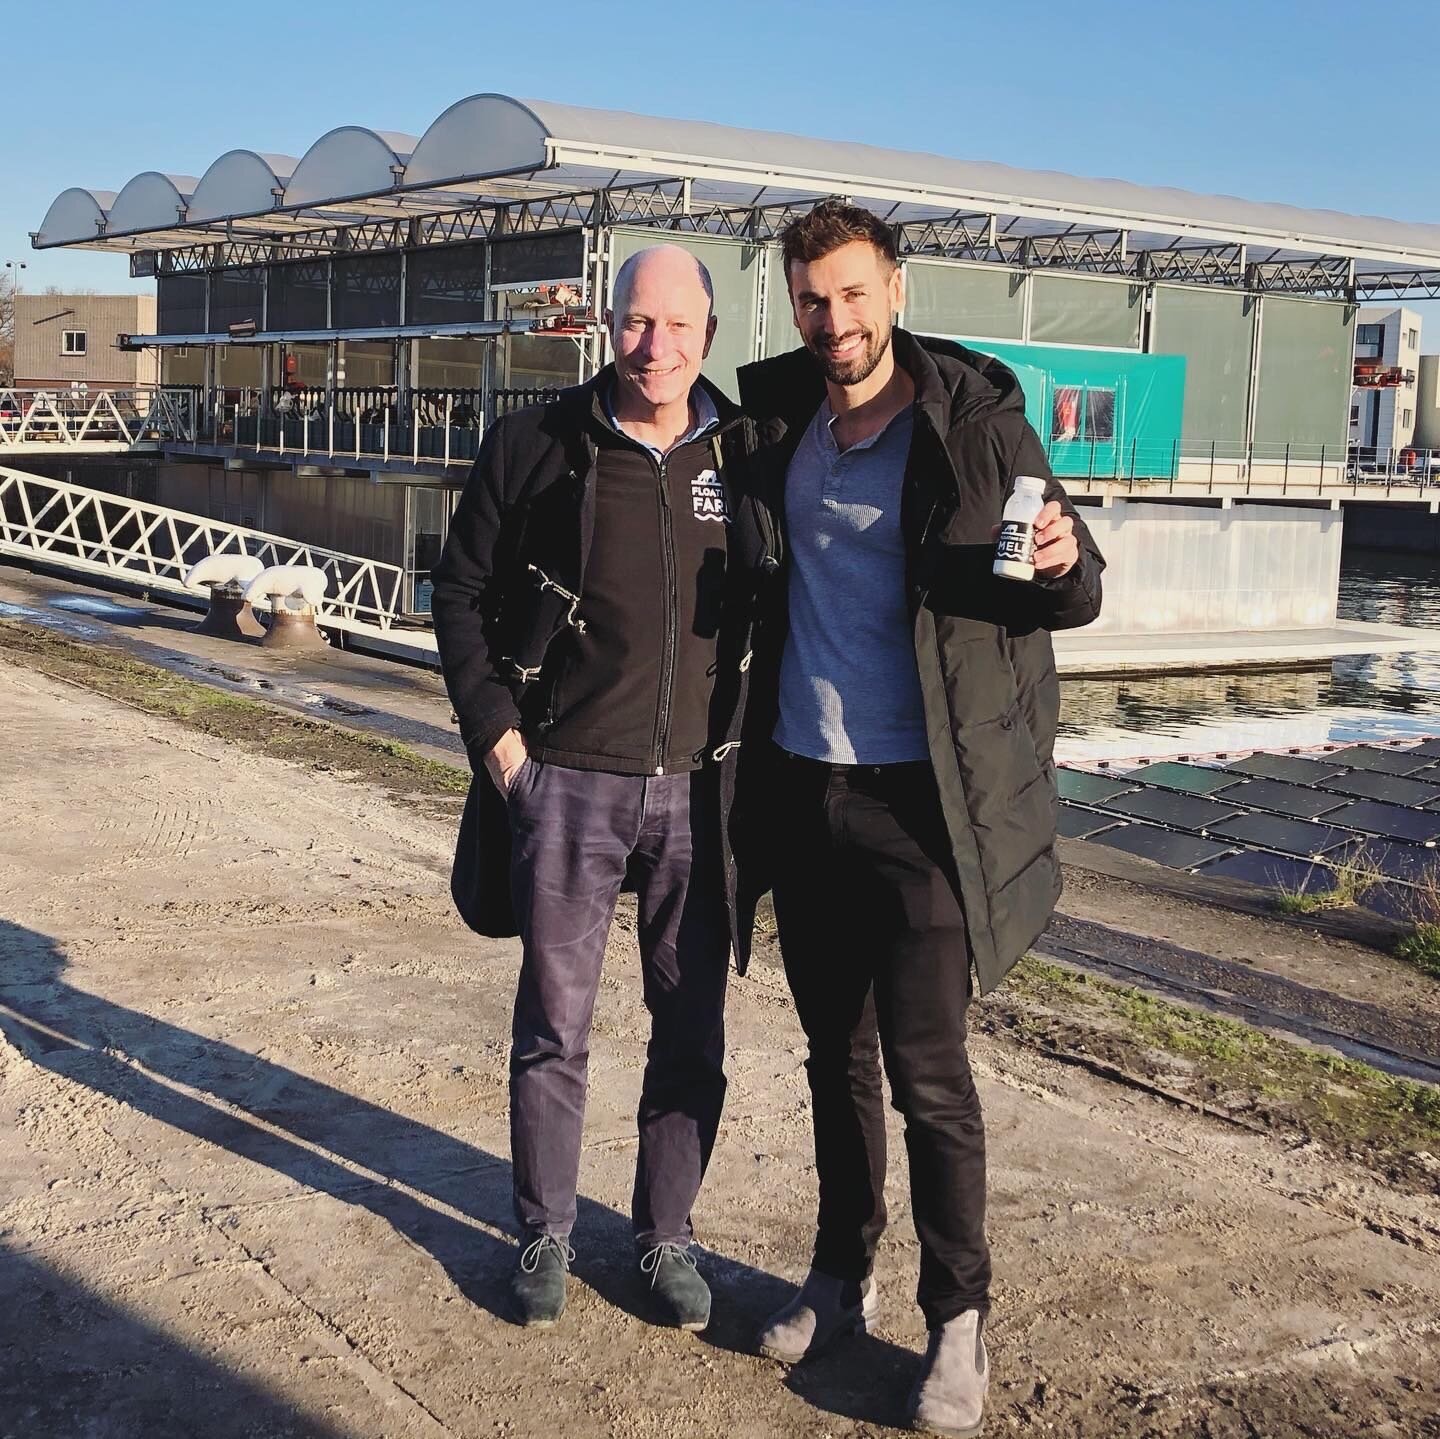 An image of Agritecture’s Founder &amp; CEO, Henry Gordon-Smith, and Peter Van Wingerden, CEO of the Floating Farm Rotterdam